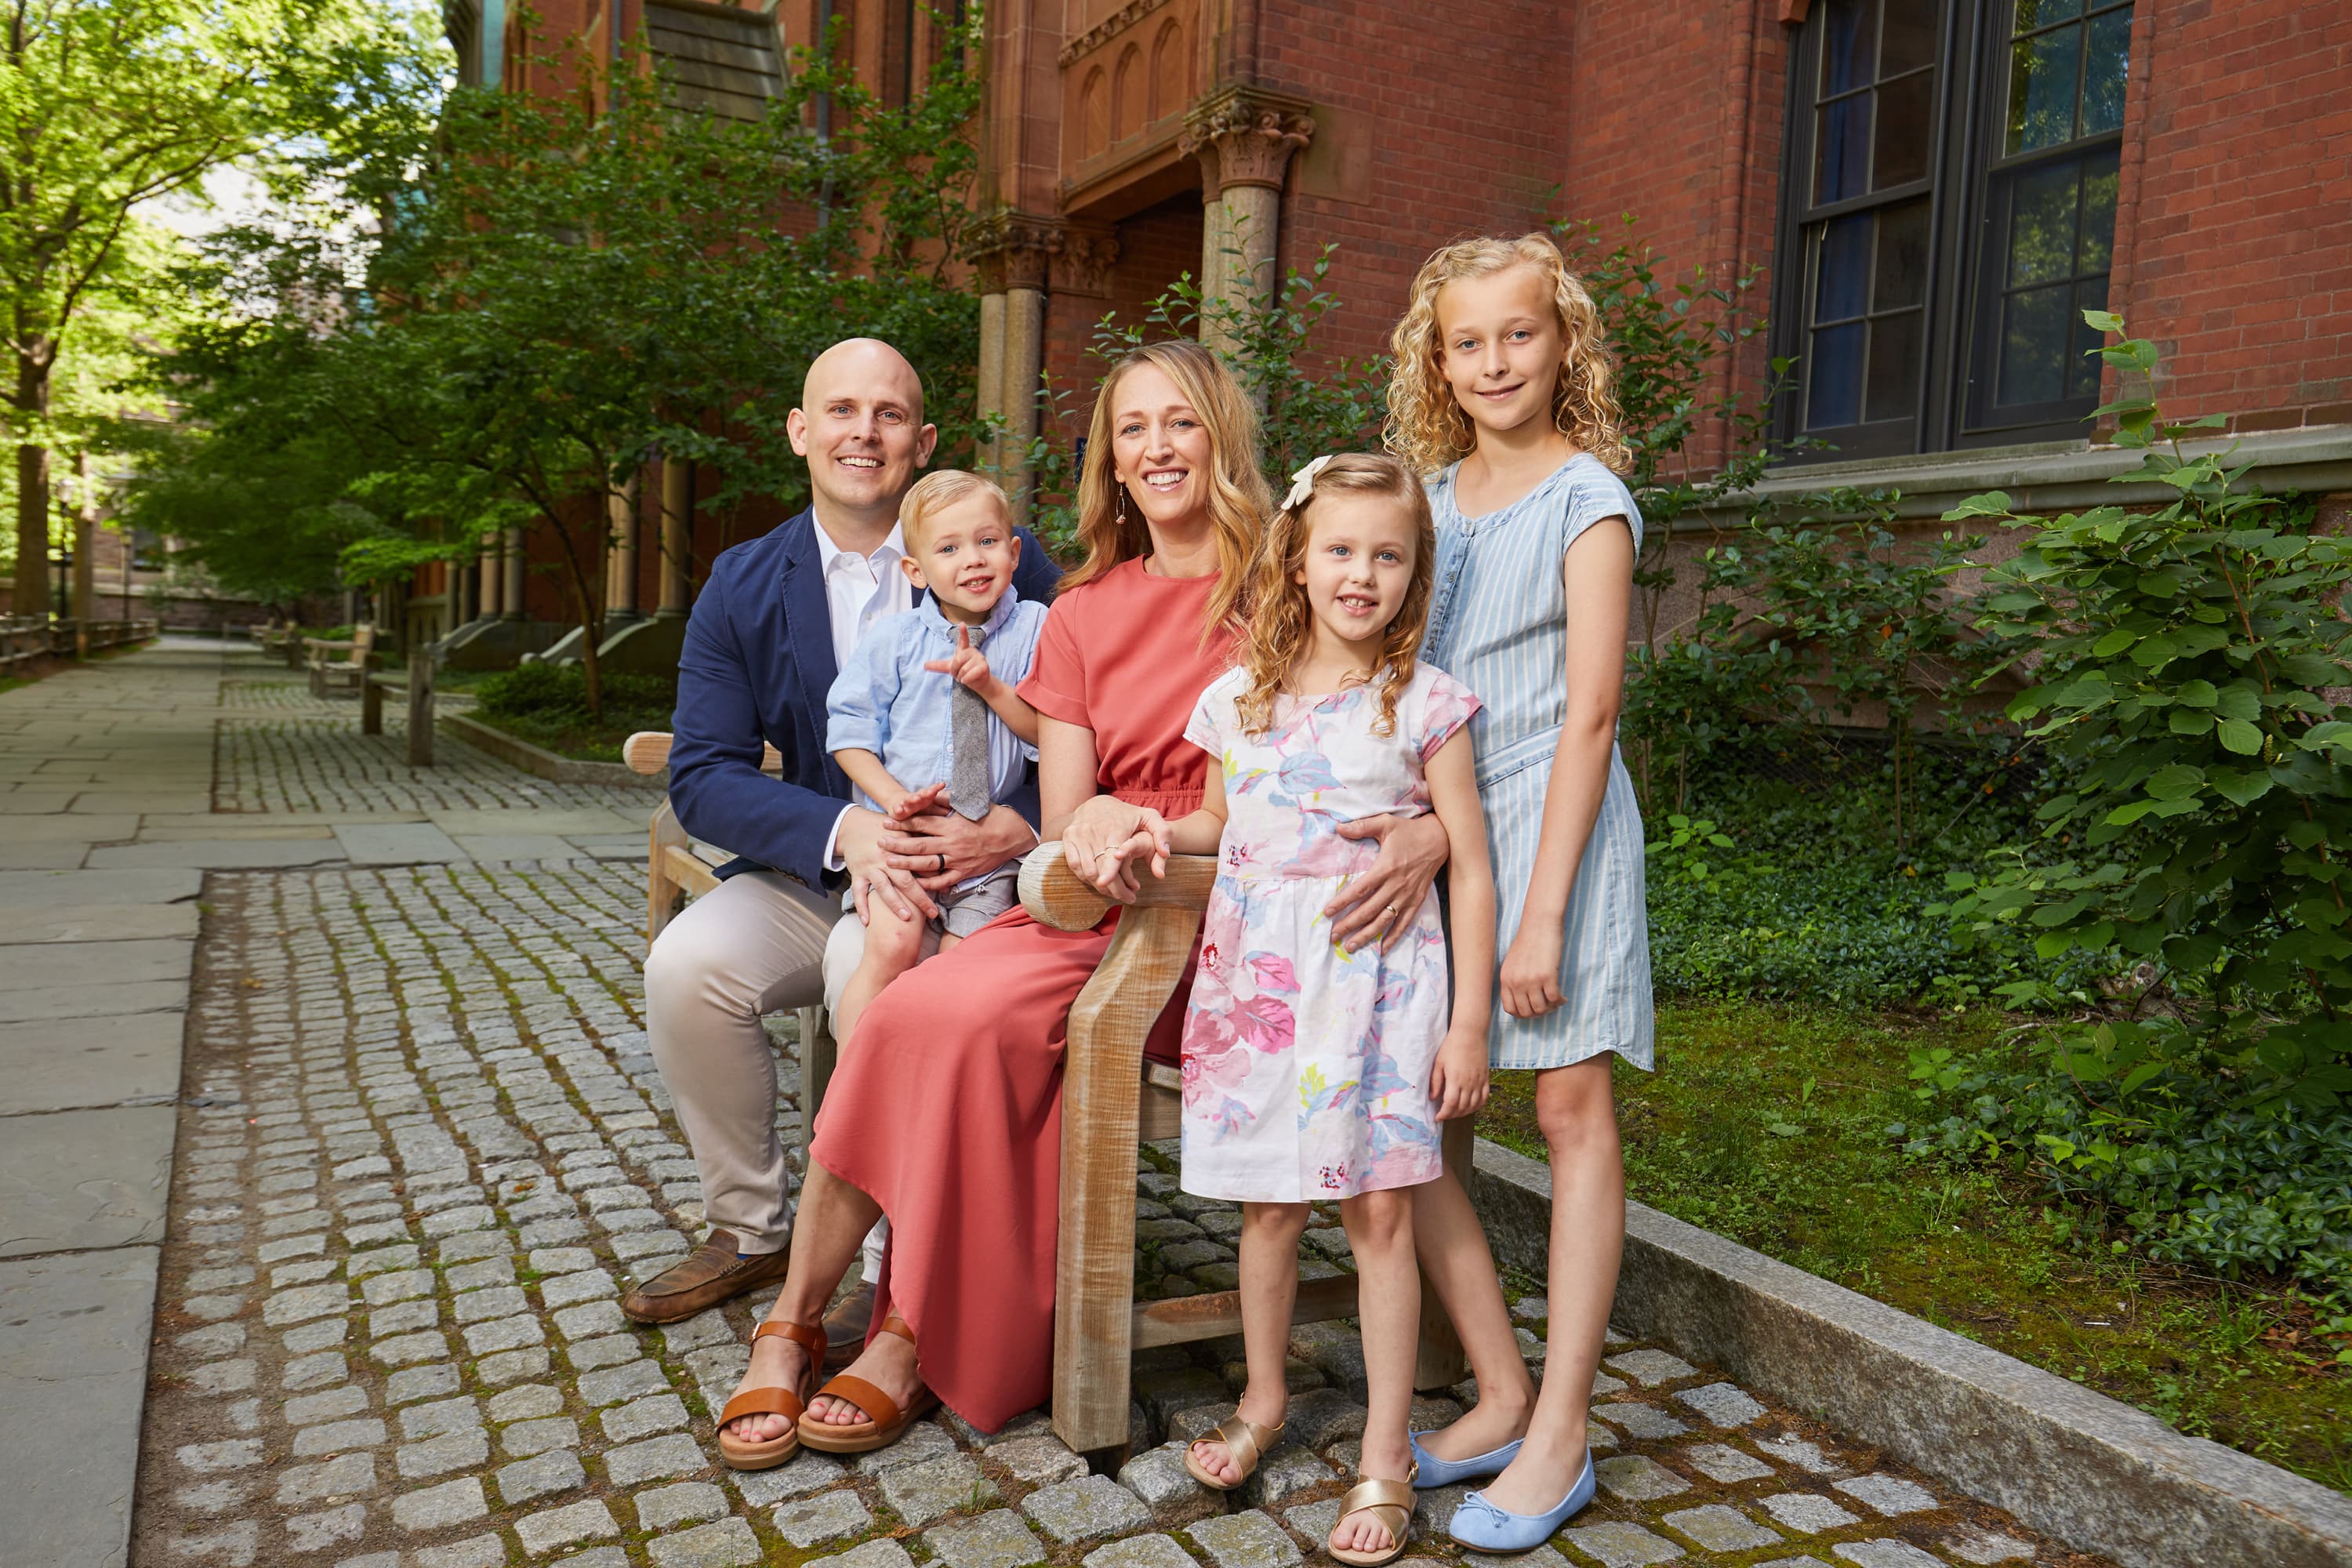 Dr. Johnson with his wife and children